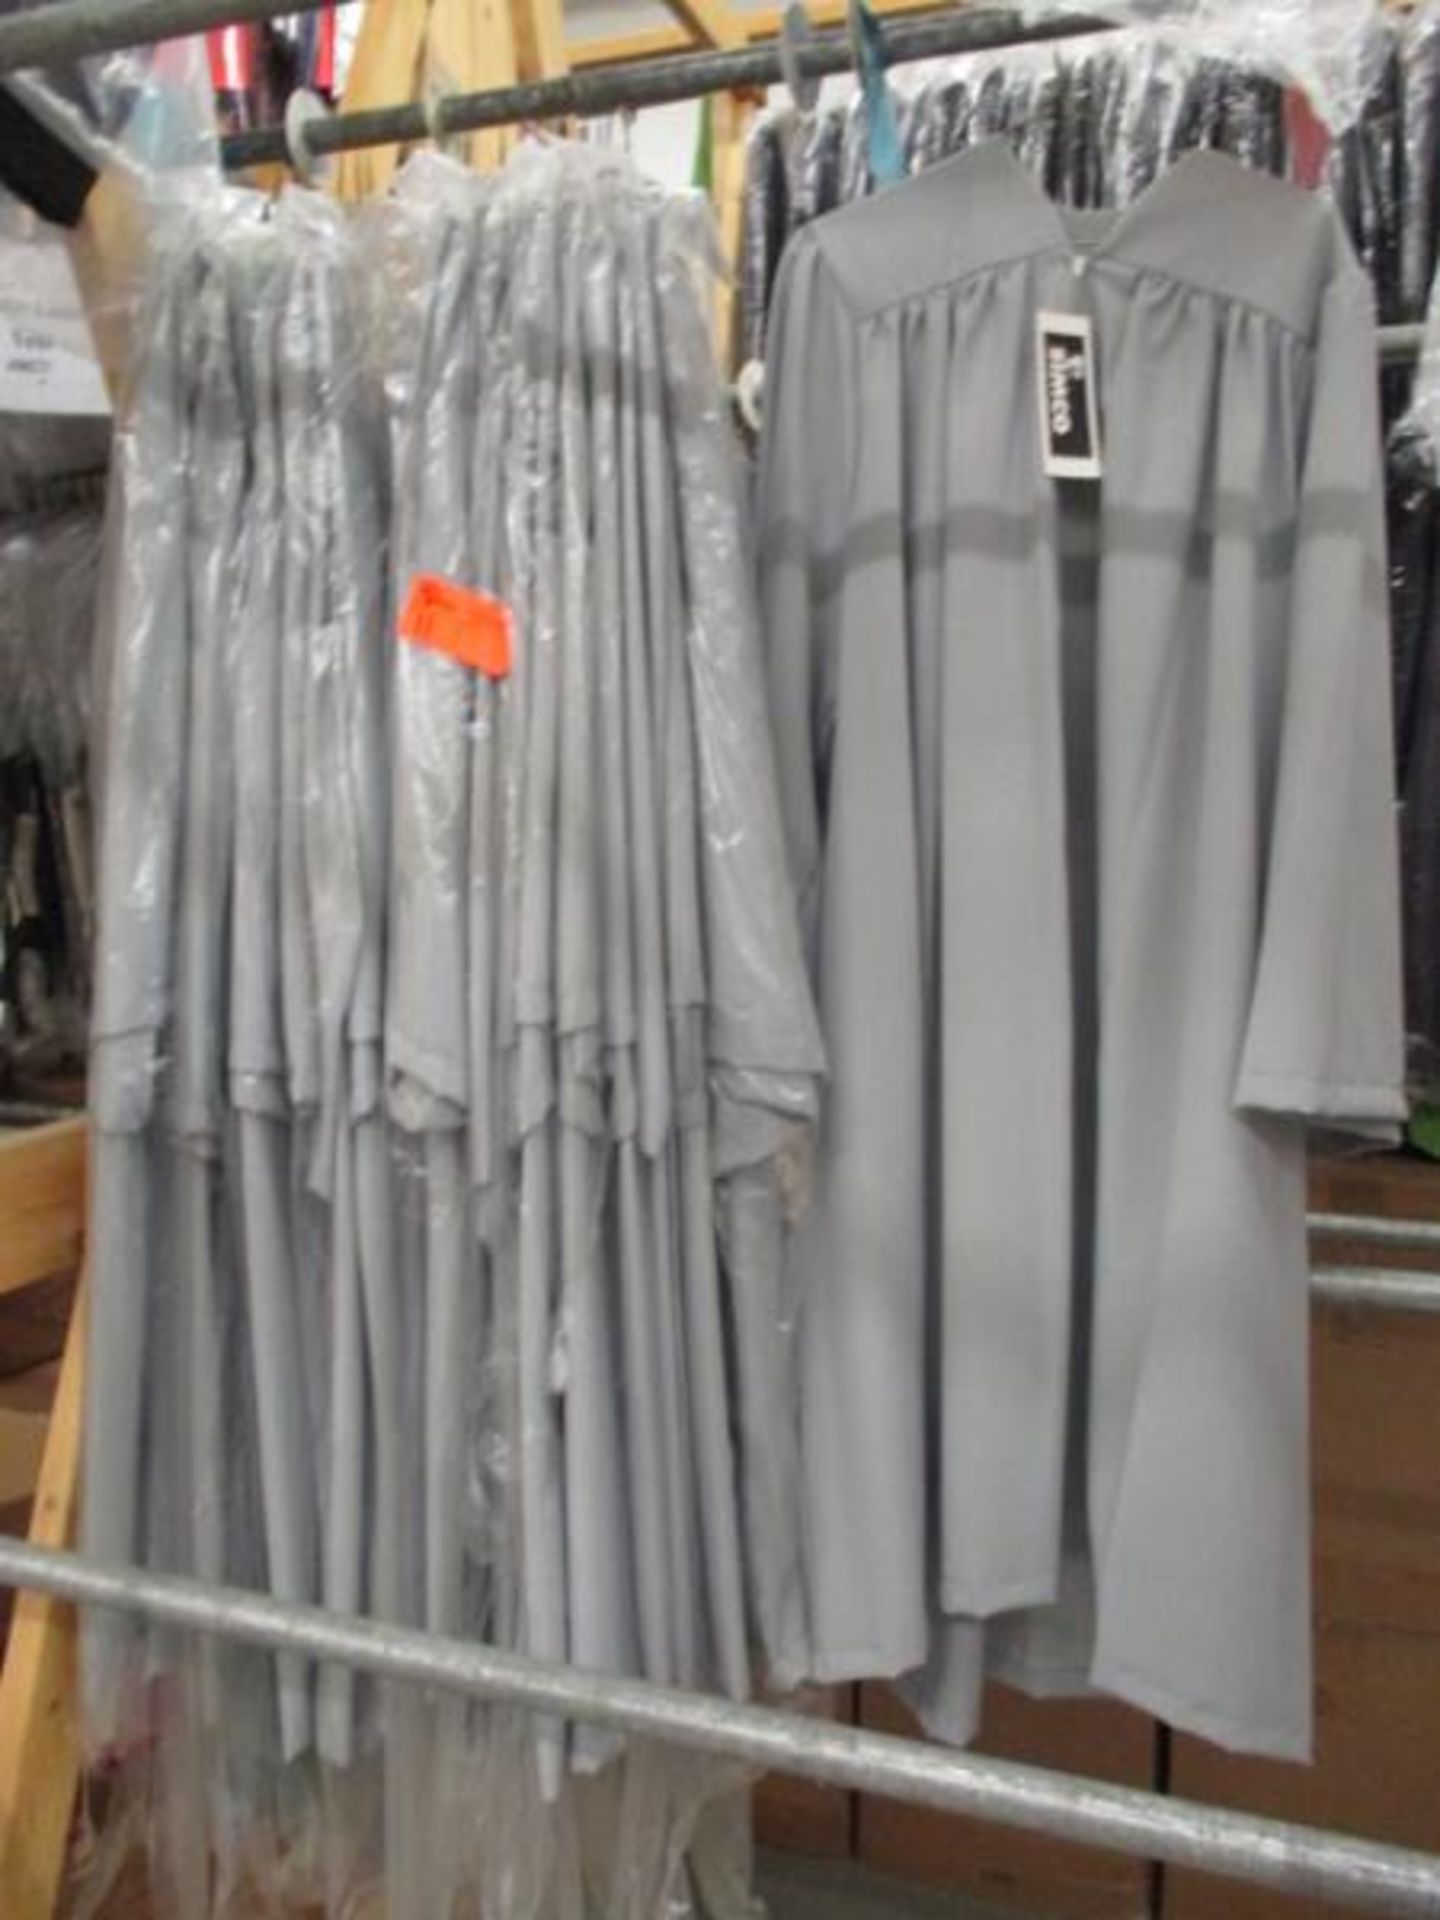 Choir Robes, Gray, Approx. 18 w/ Accessory Collars